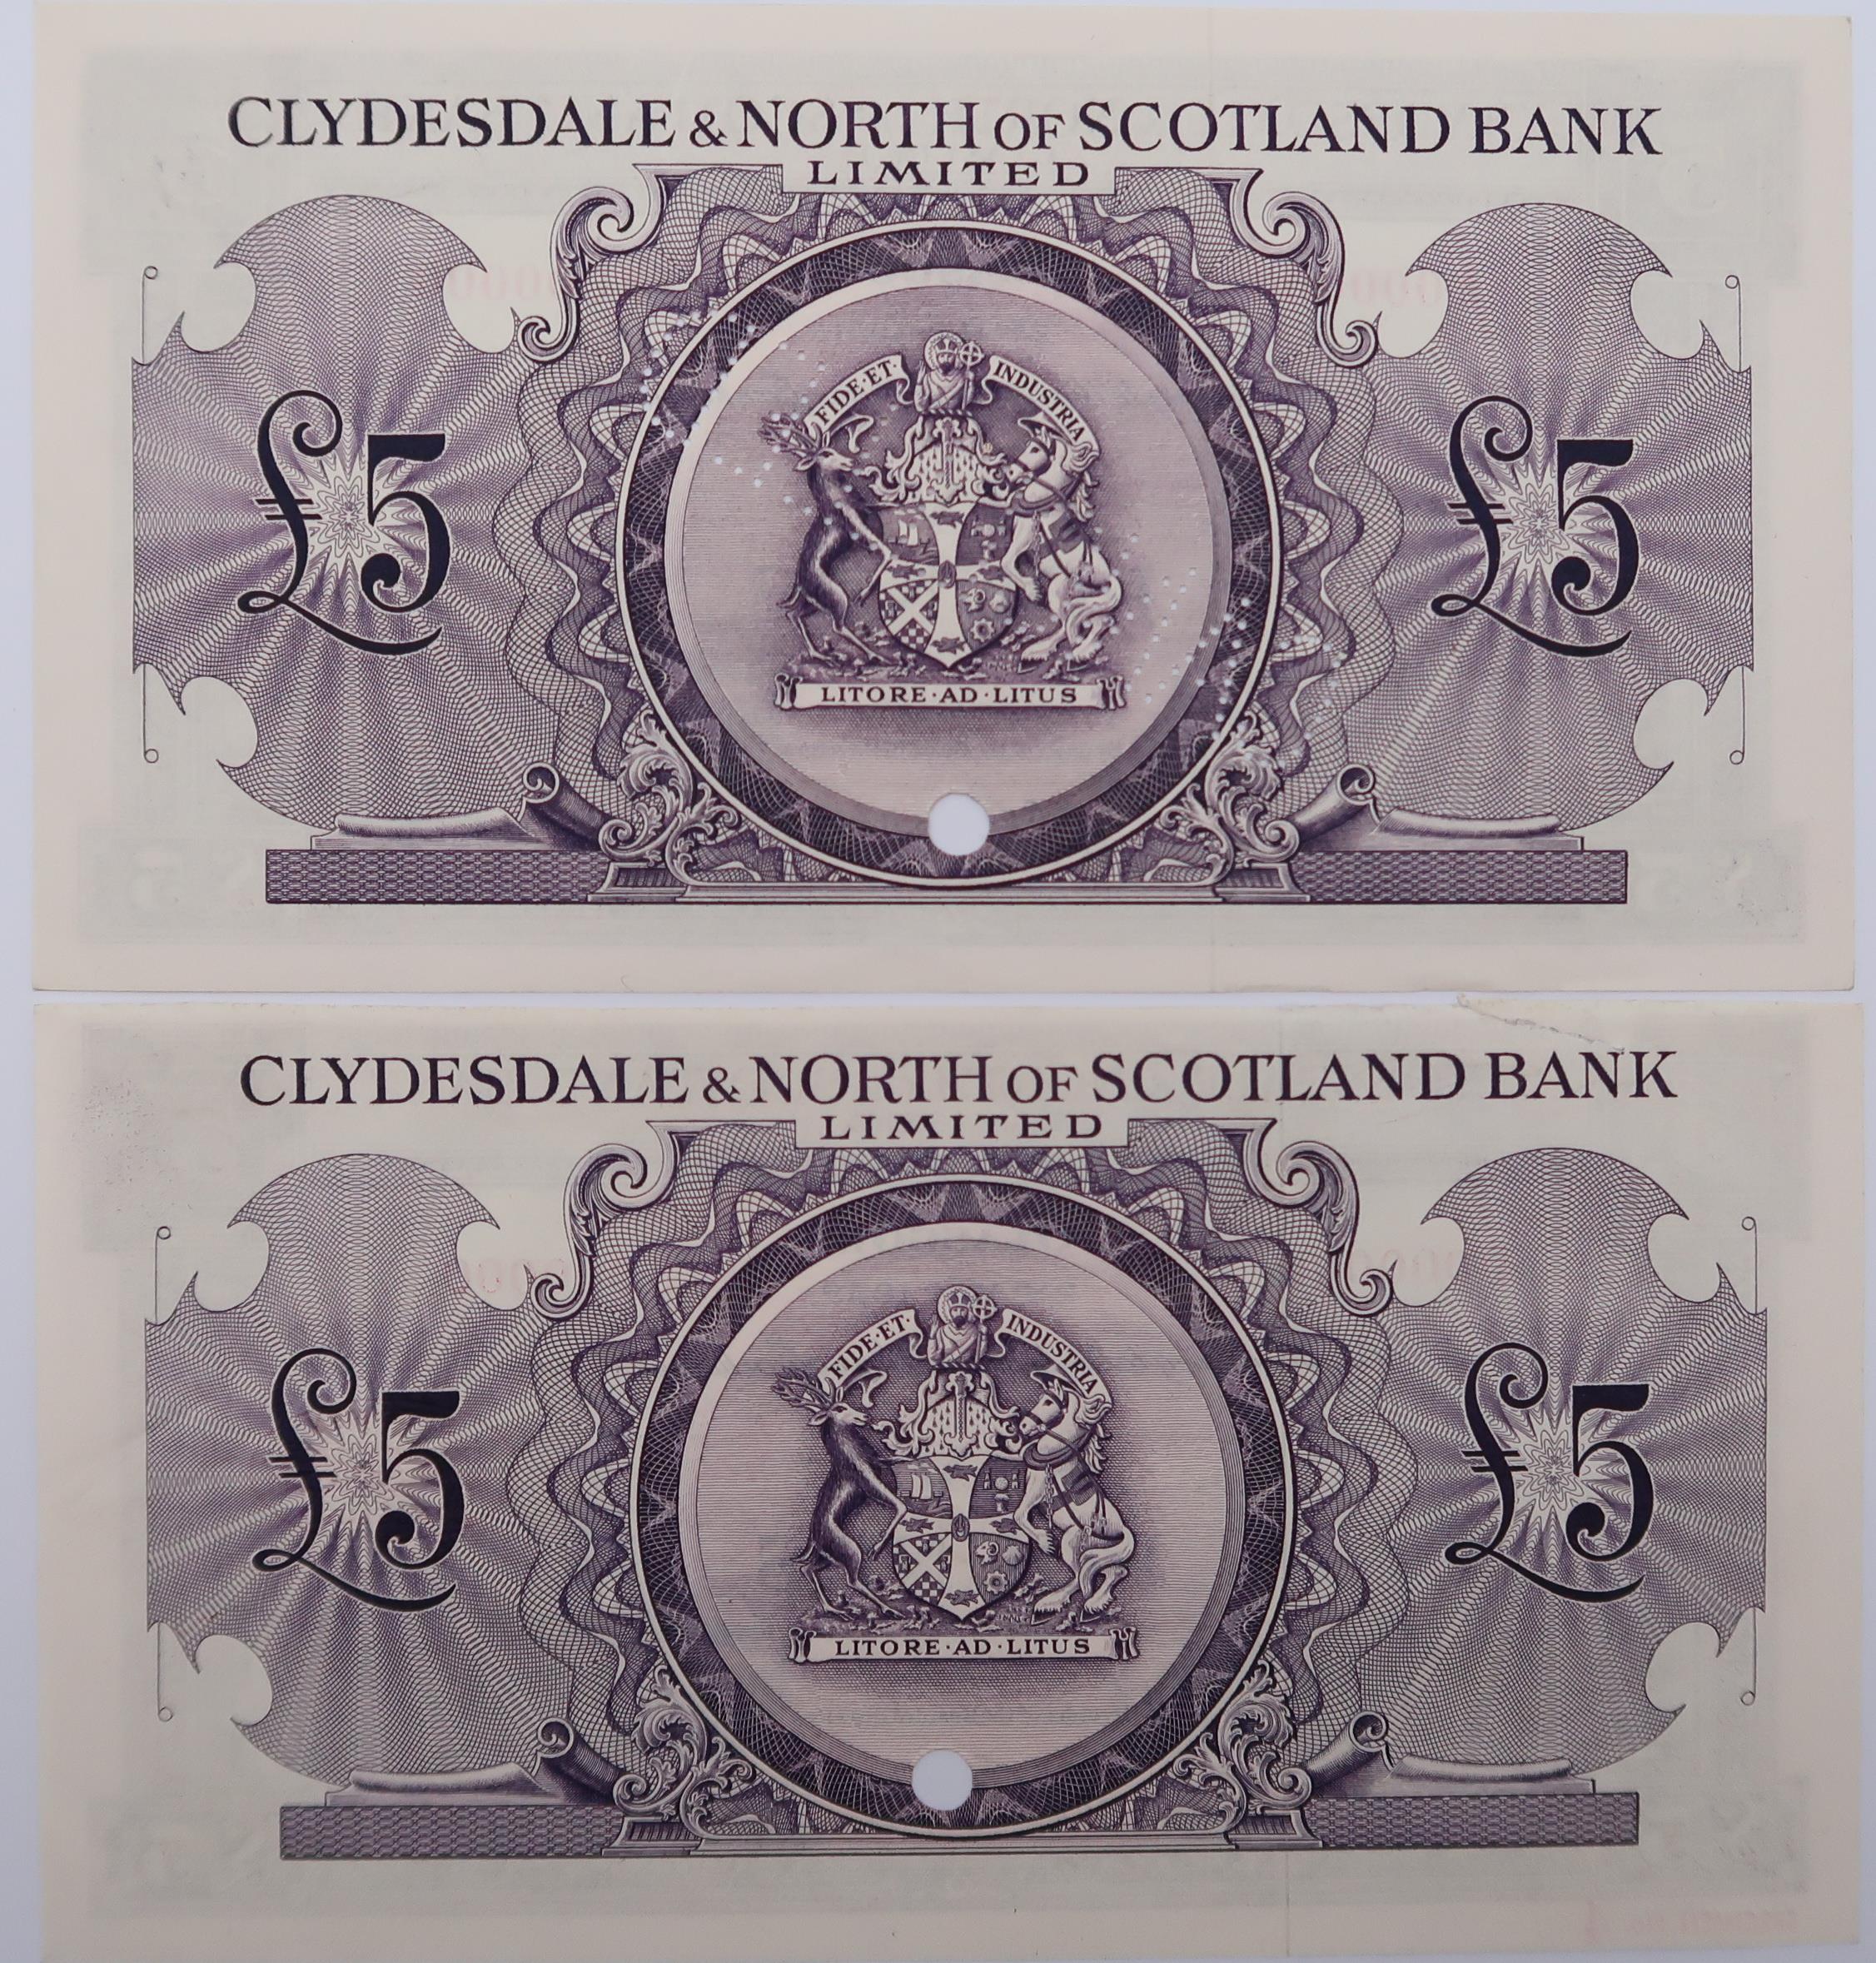 Clydesdale & North of Scotland Bank Limited specimen £5 note 2nd May 1951 Glasgow Campbell and a - Image 2 of 3